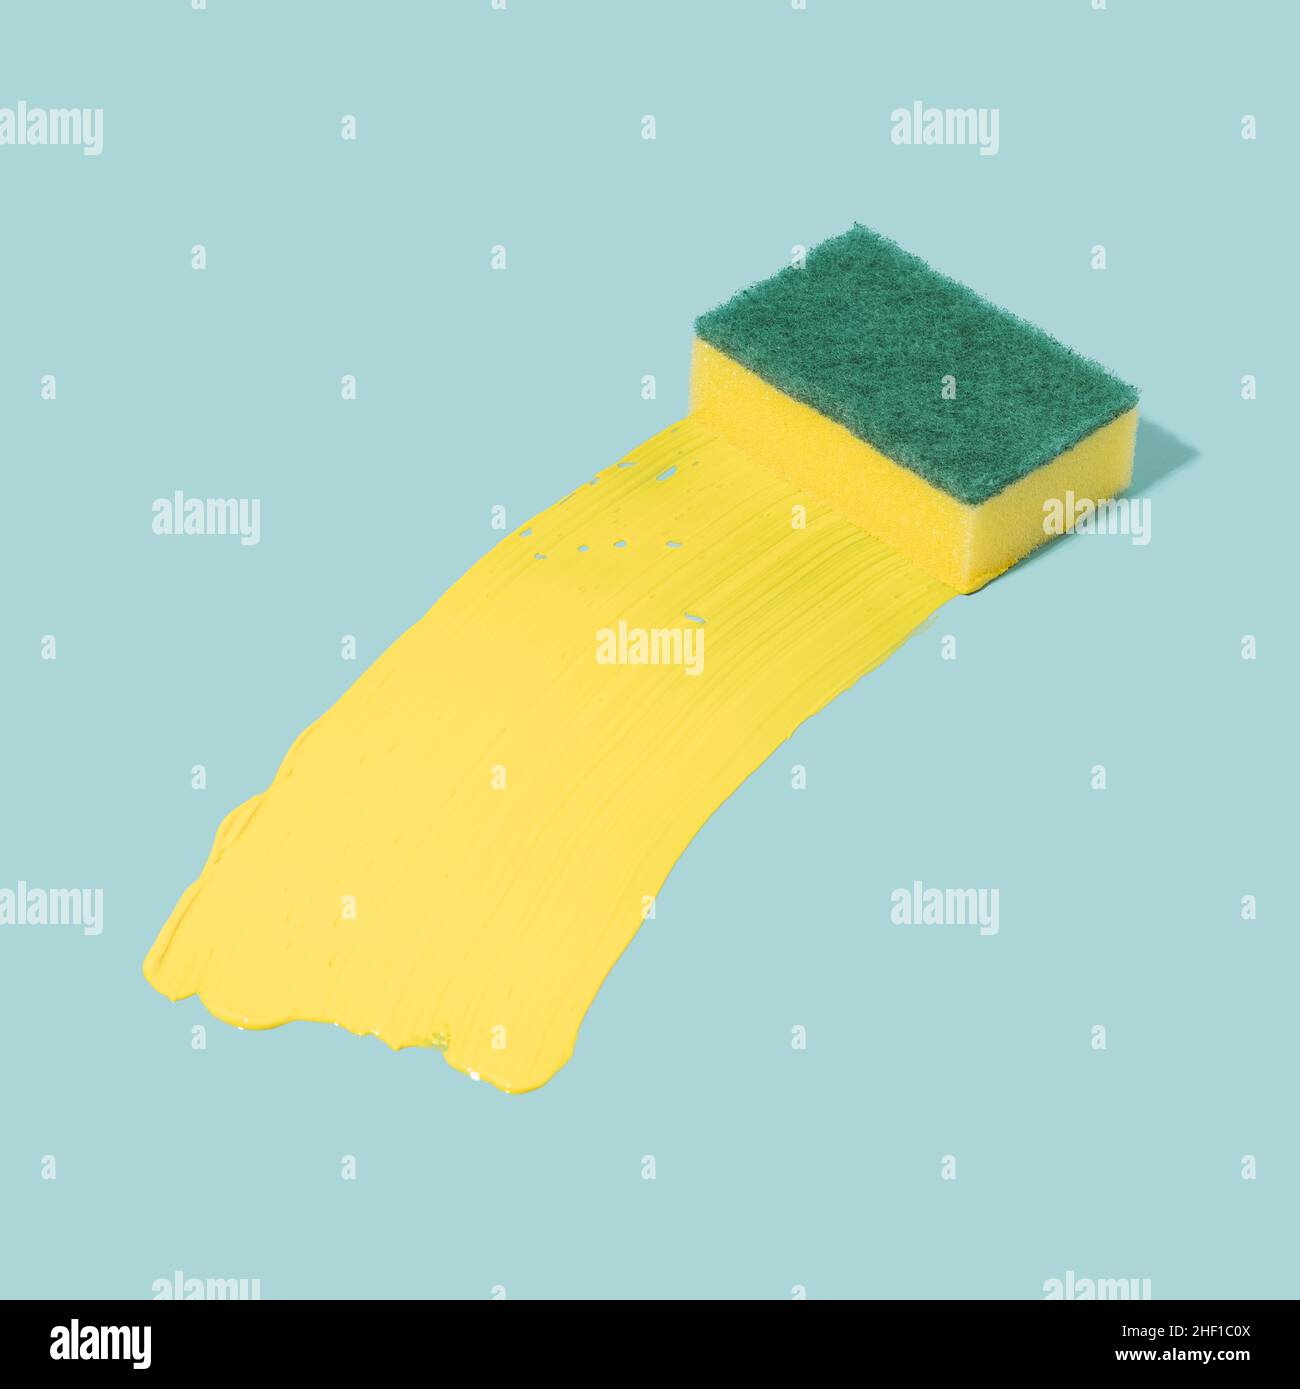 Cleaning sponge with a trail of yellow acrylic paint on a pastel blue background. Surreal cleaning concept. Stock Photo